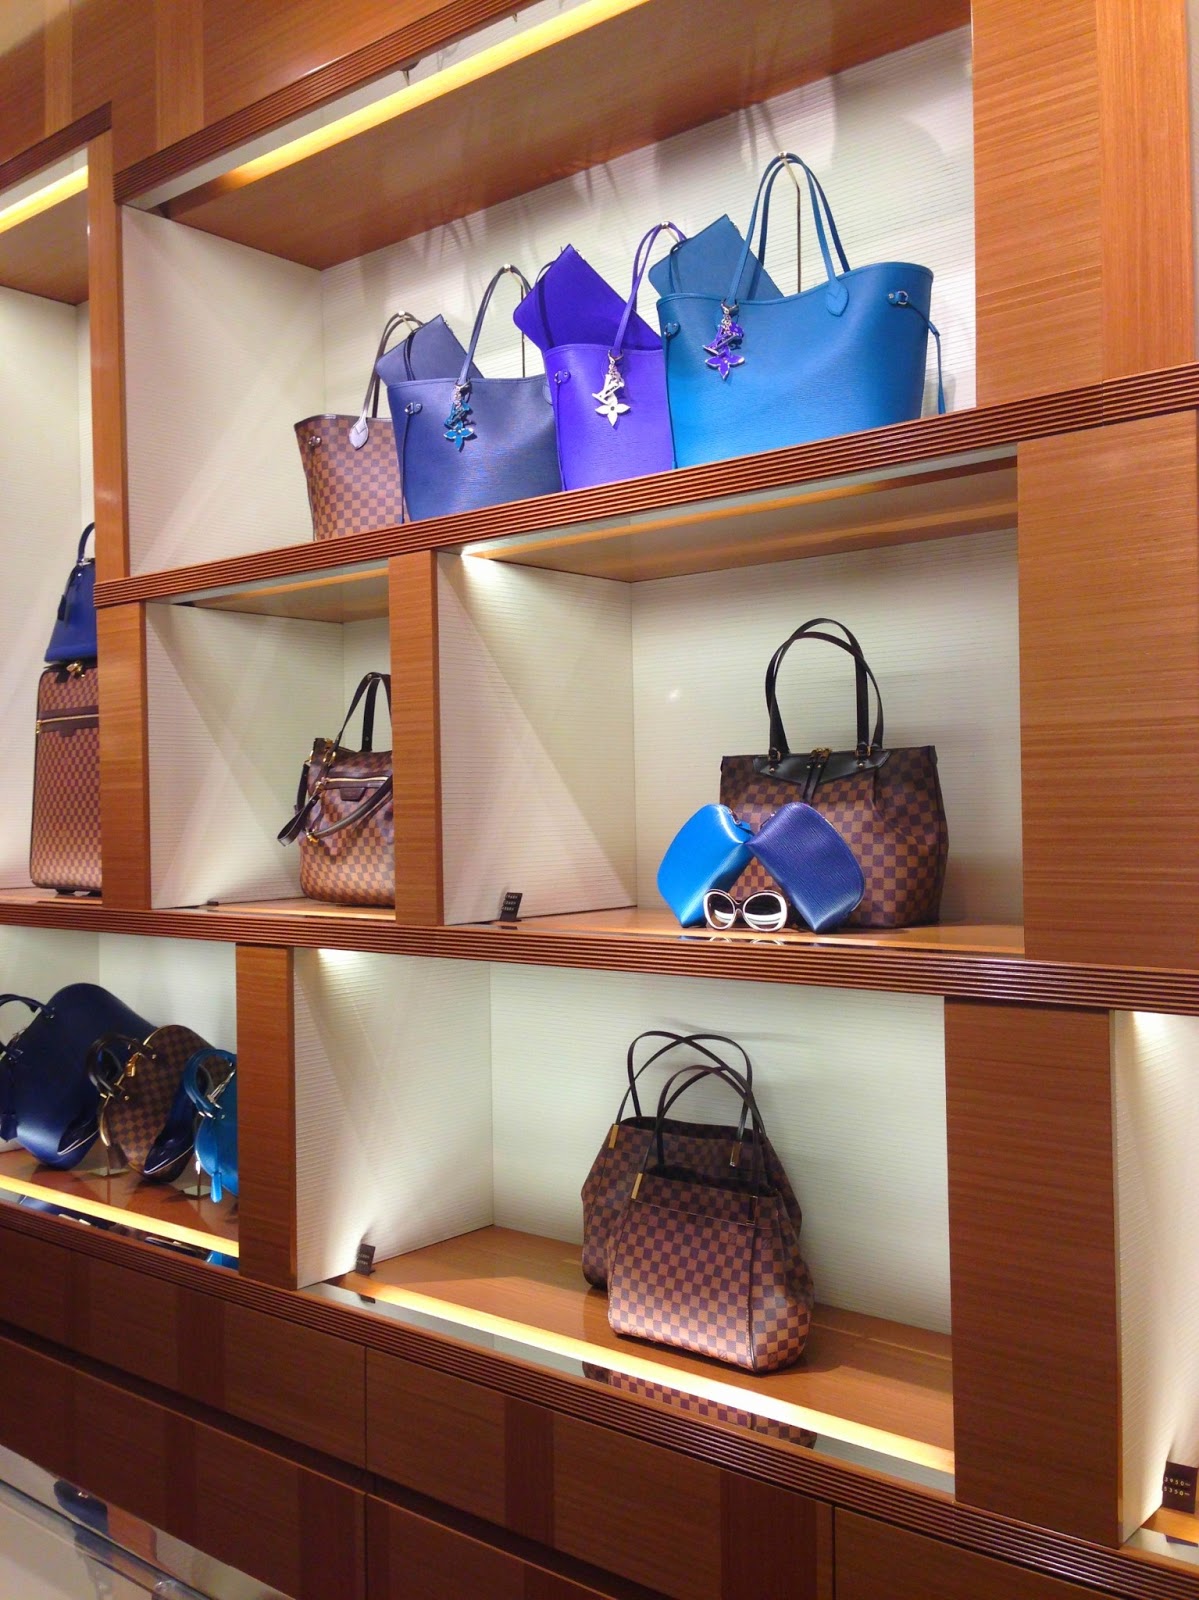 Welcome To Poland's First Louis Vuitton Store: Open Your Bag